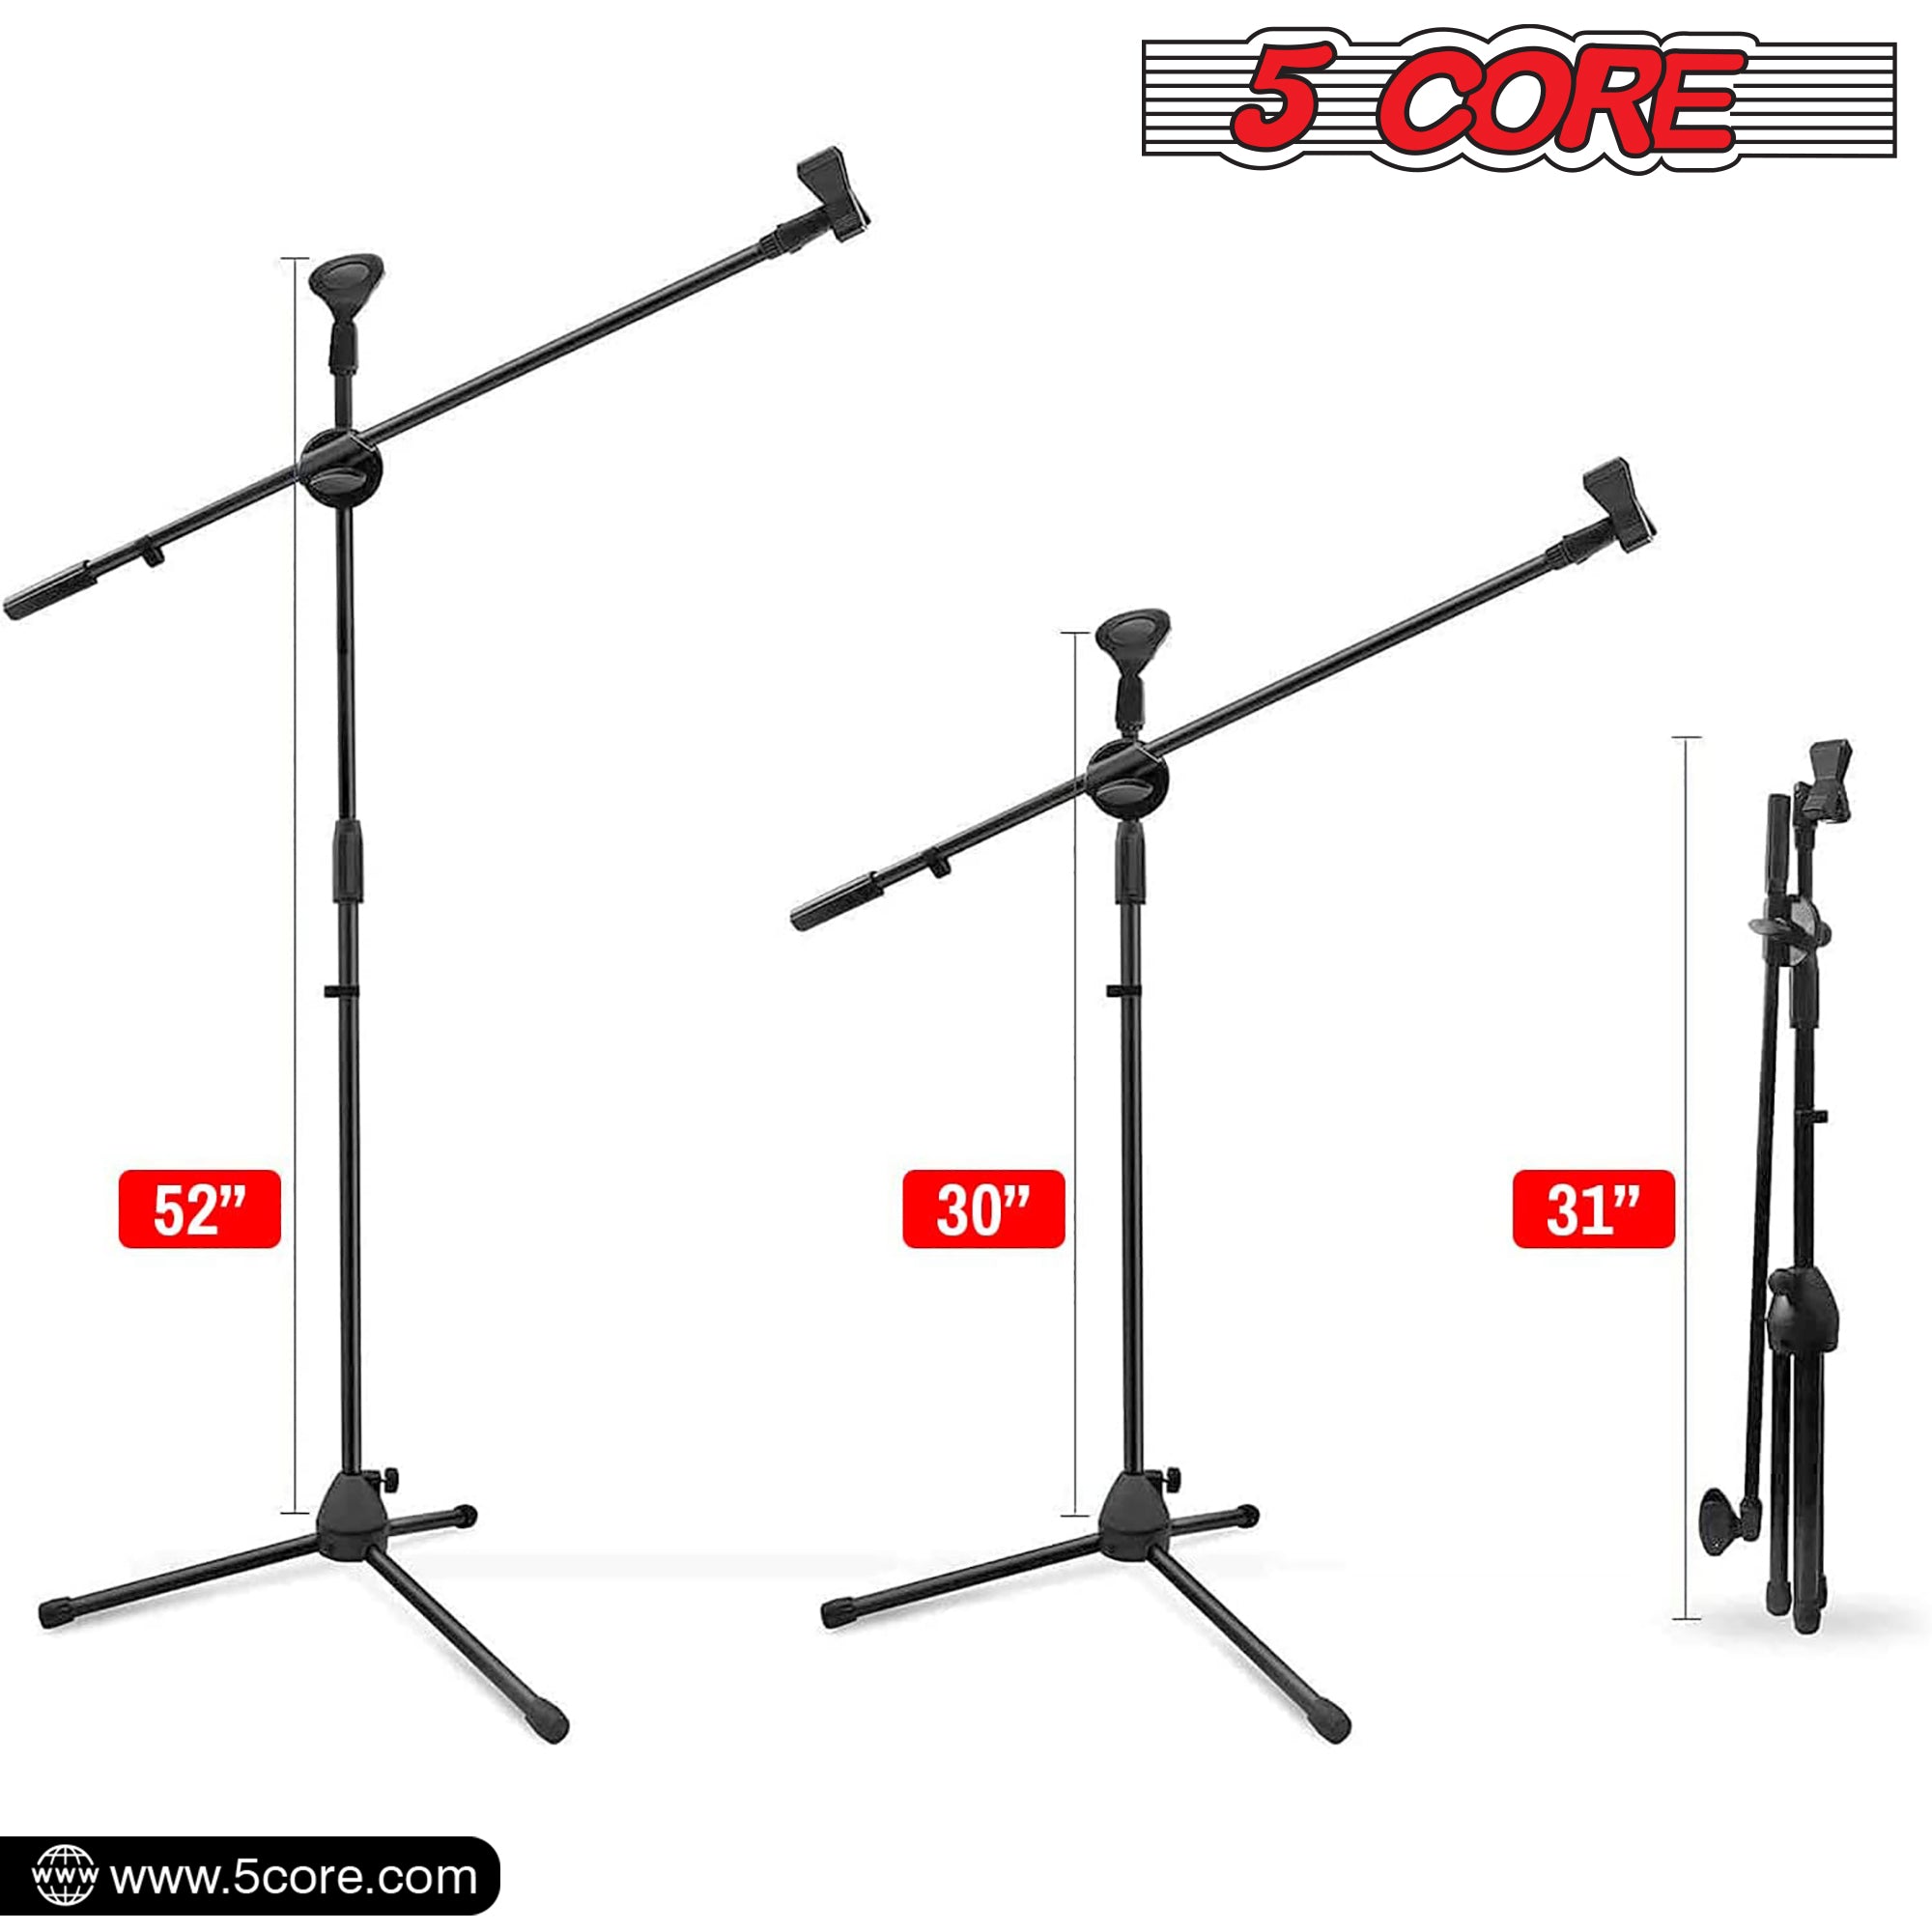 5 Core Mic Stand Black 1 Piece Collapsible Height Adjustable 31 to 59” Dual Metal Microphone Tripod Stand w Boom Arm Stand Para Microfono for Singing, Karaoke, Stage and Outdoor Activities - MS DBL